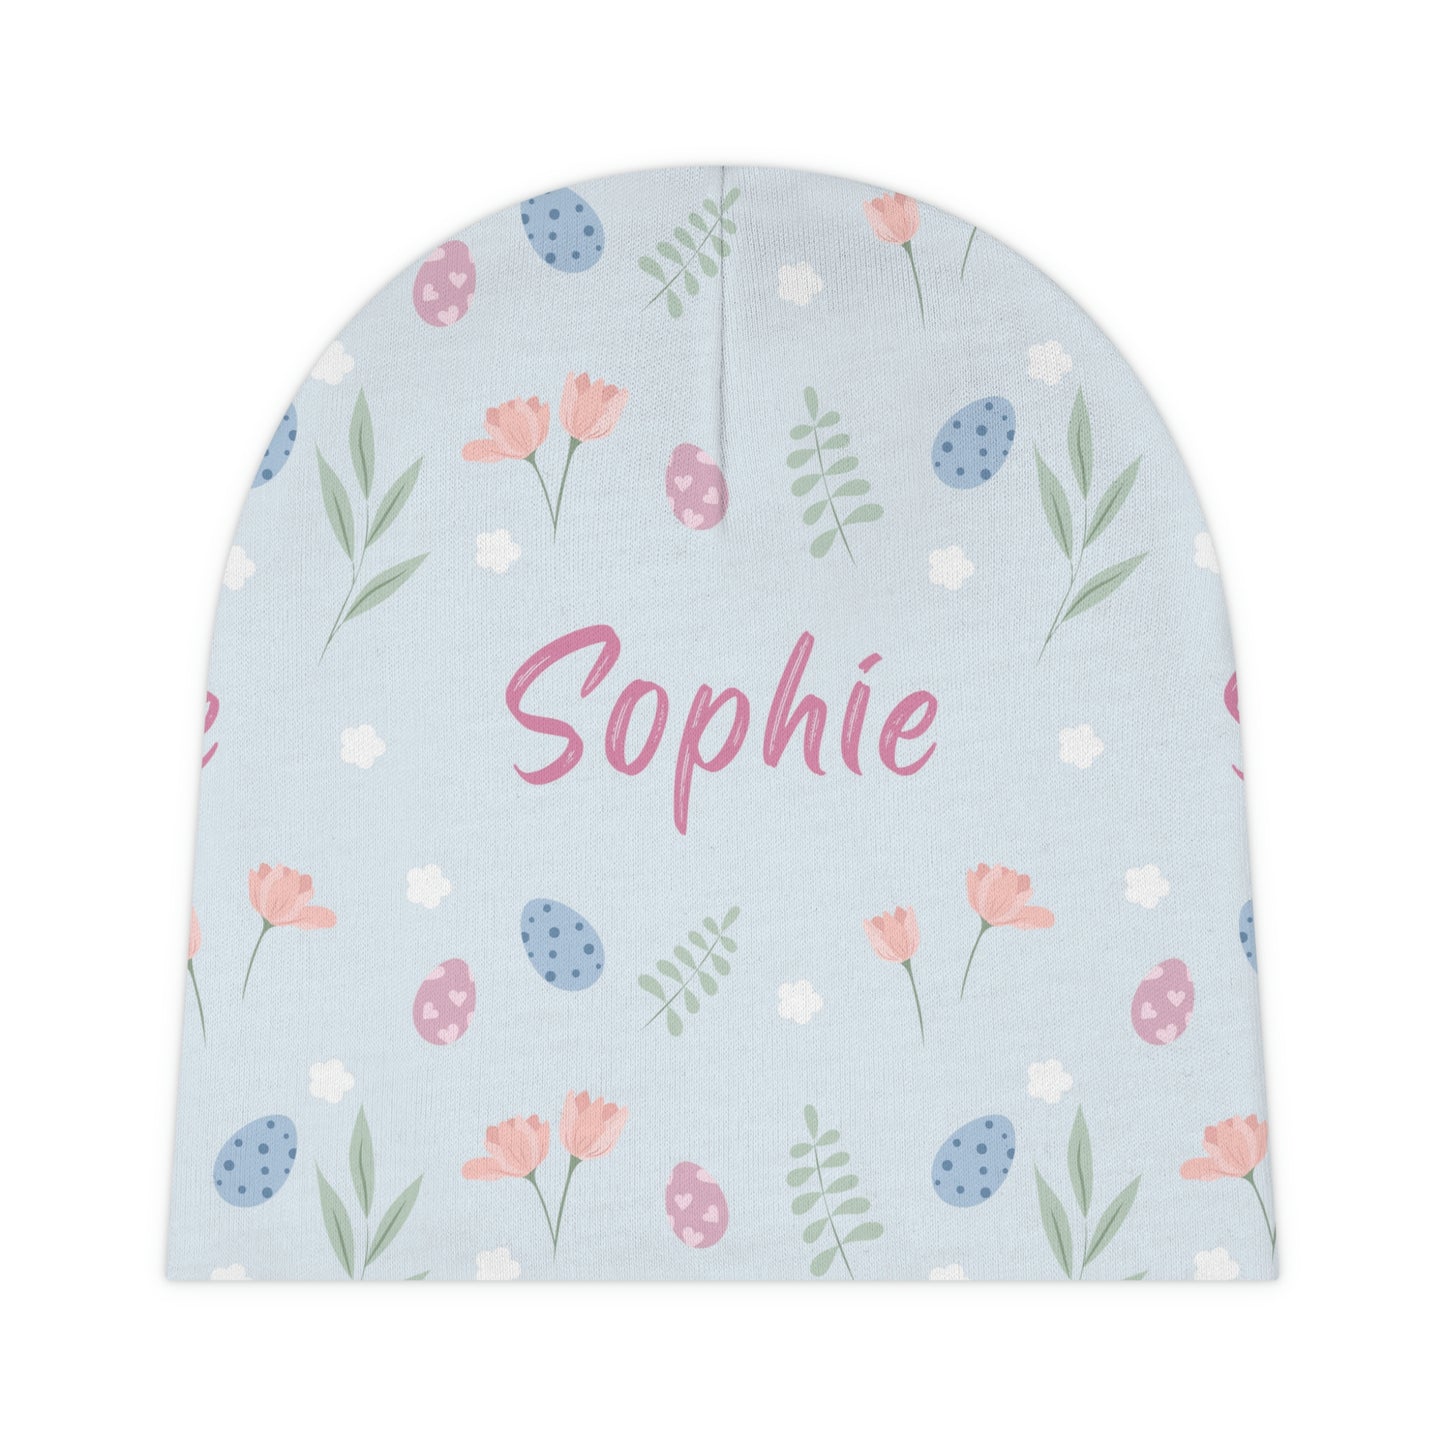 Easter Garden Personalized Baby Beanie